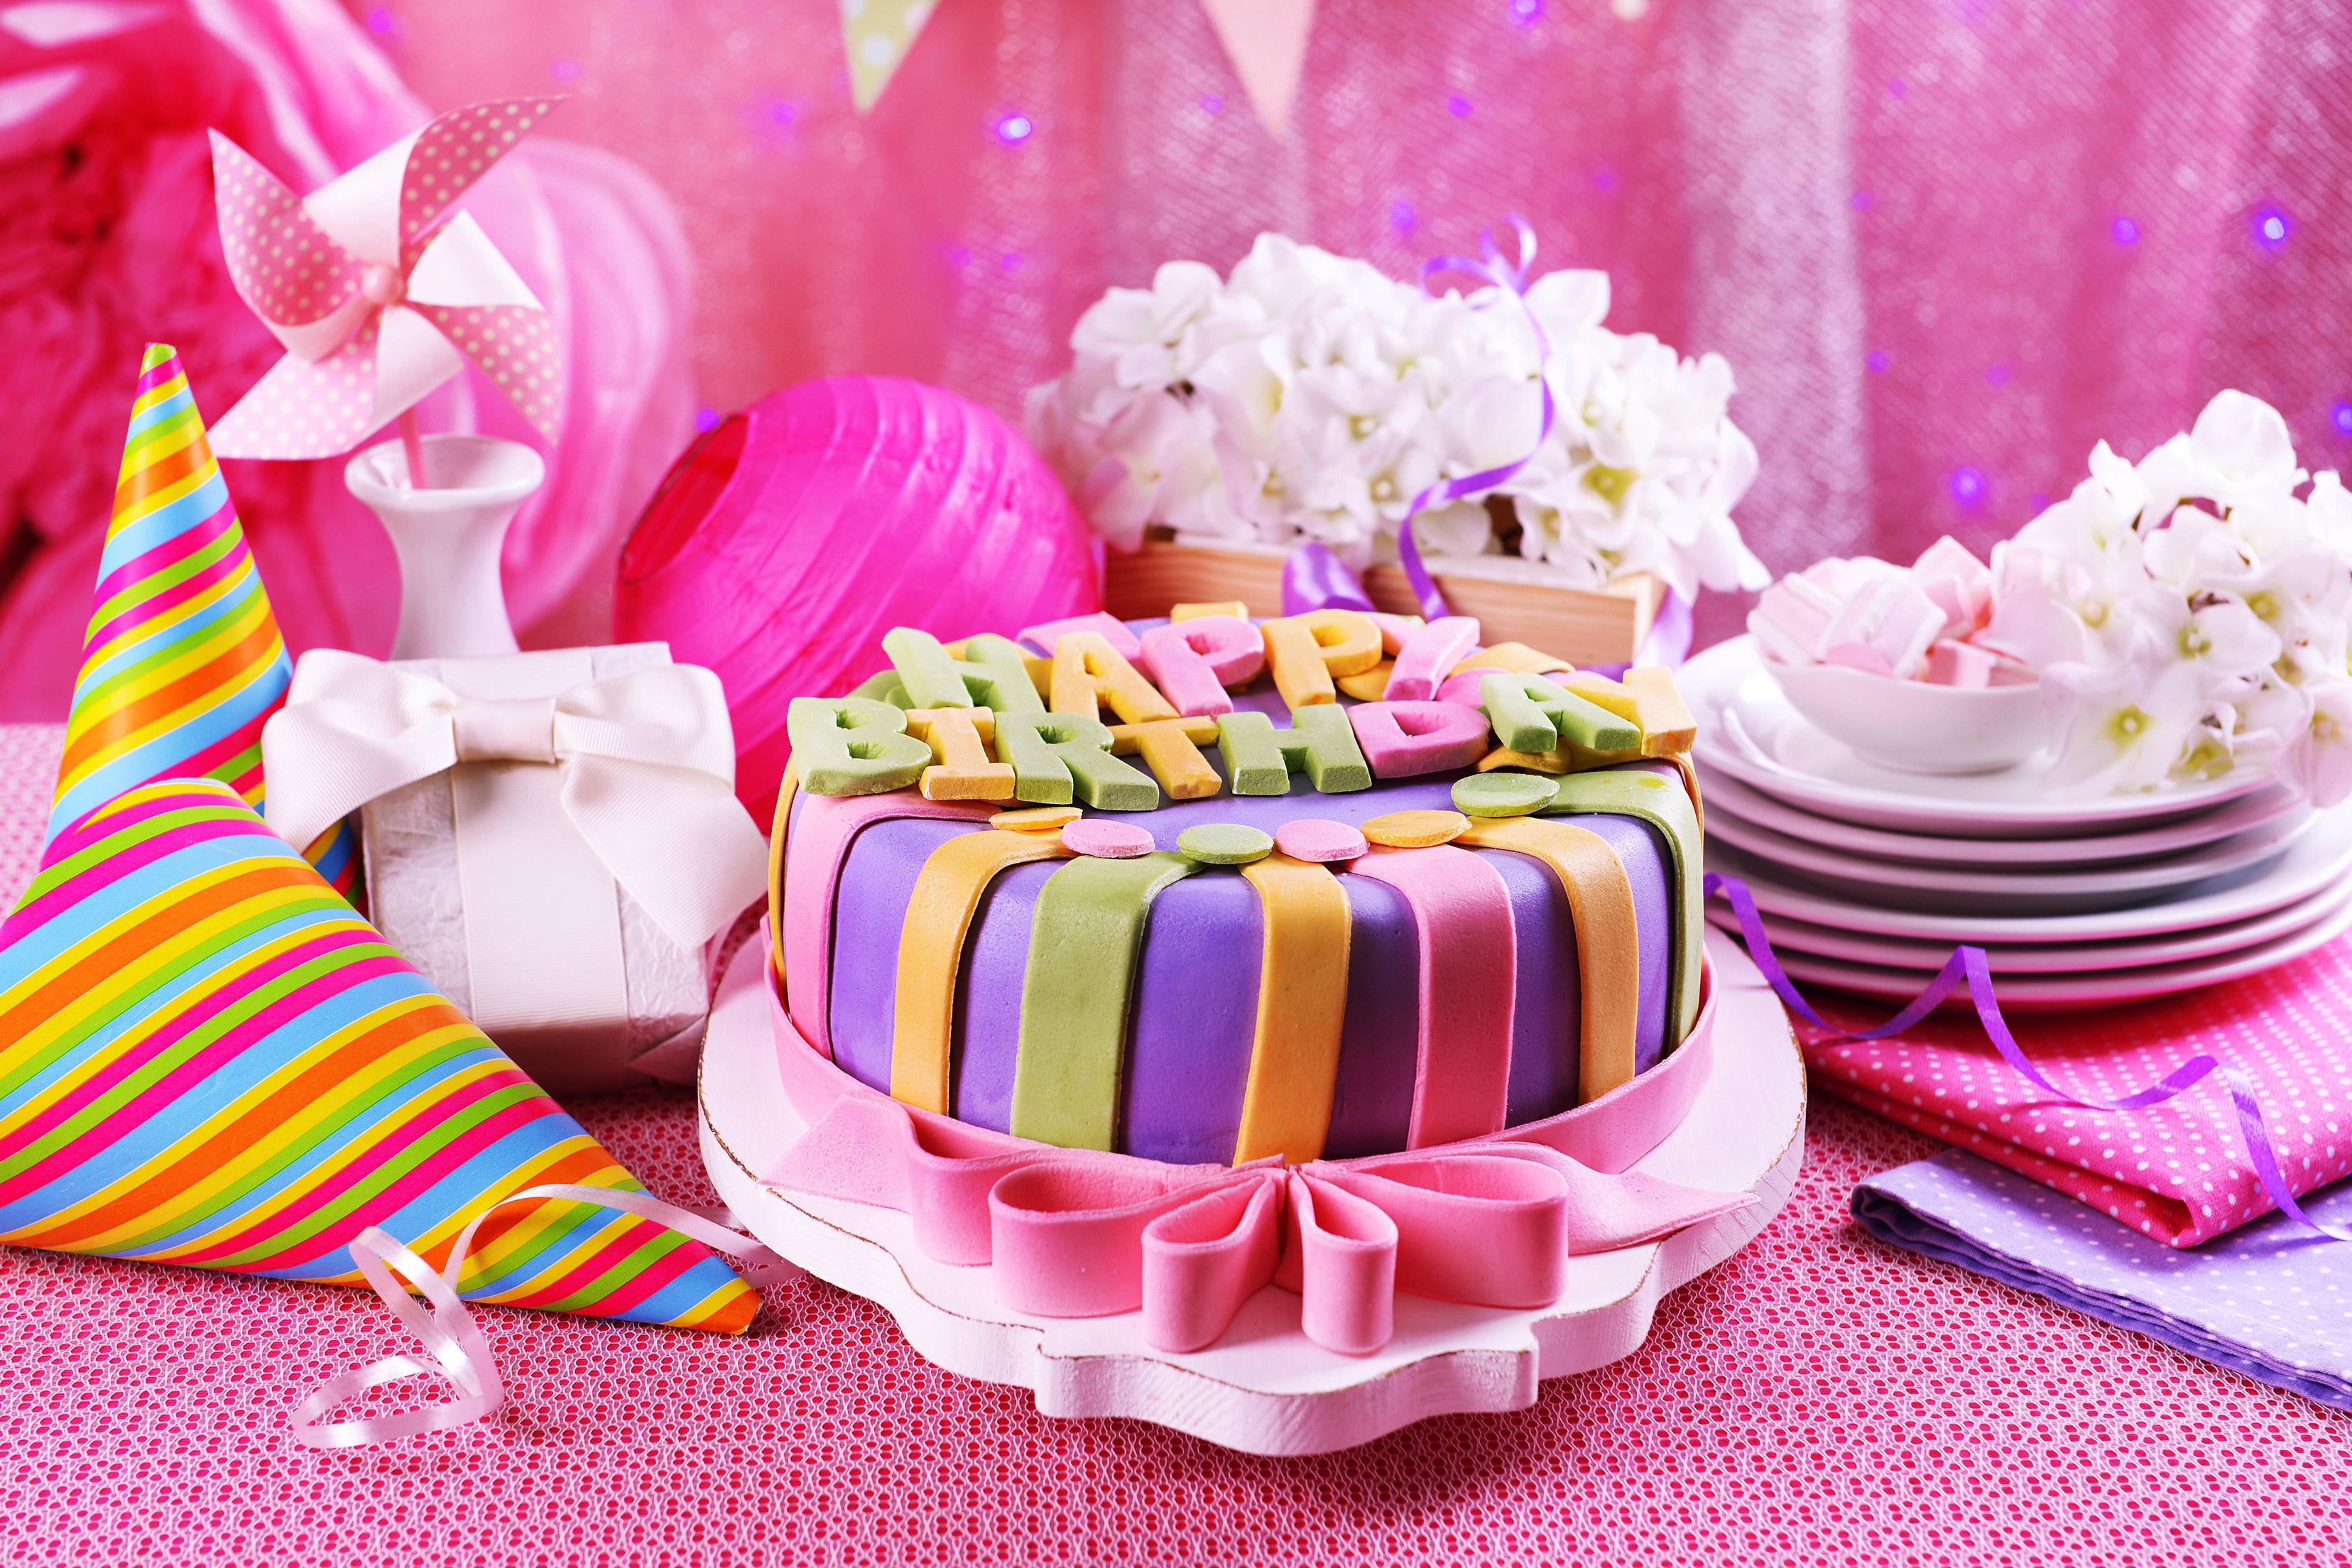 Stock Images Birthday background, balloons, cake, gifts, Stock Images #24987